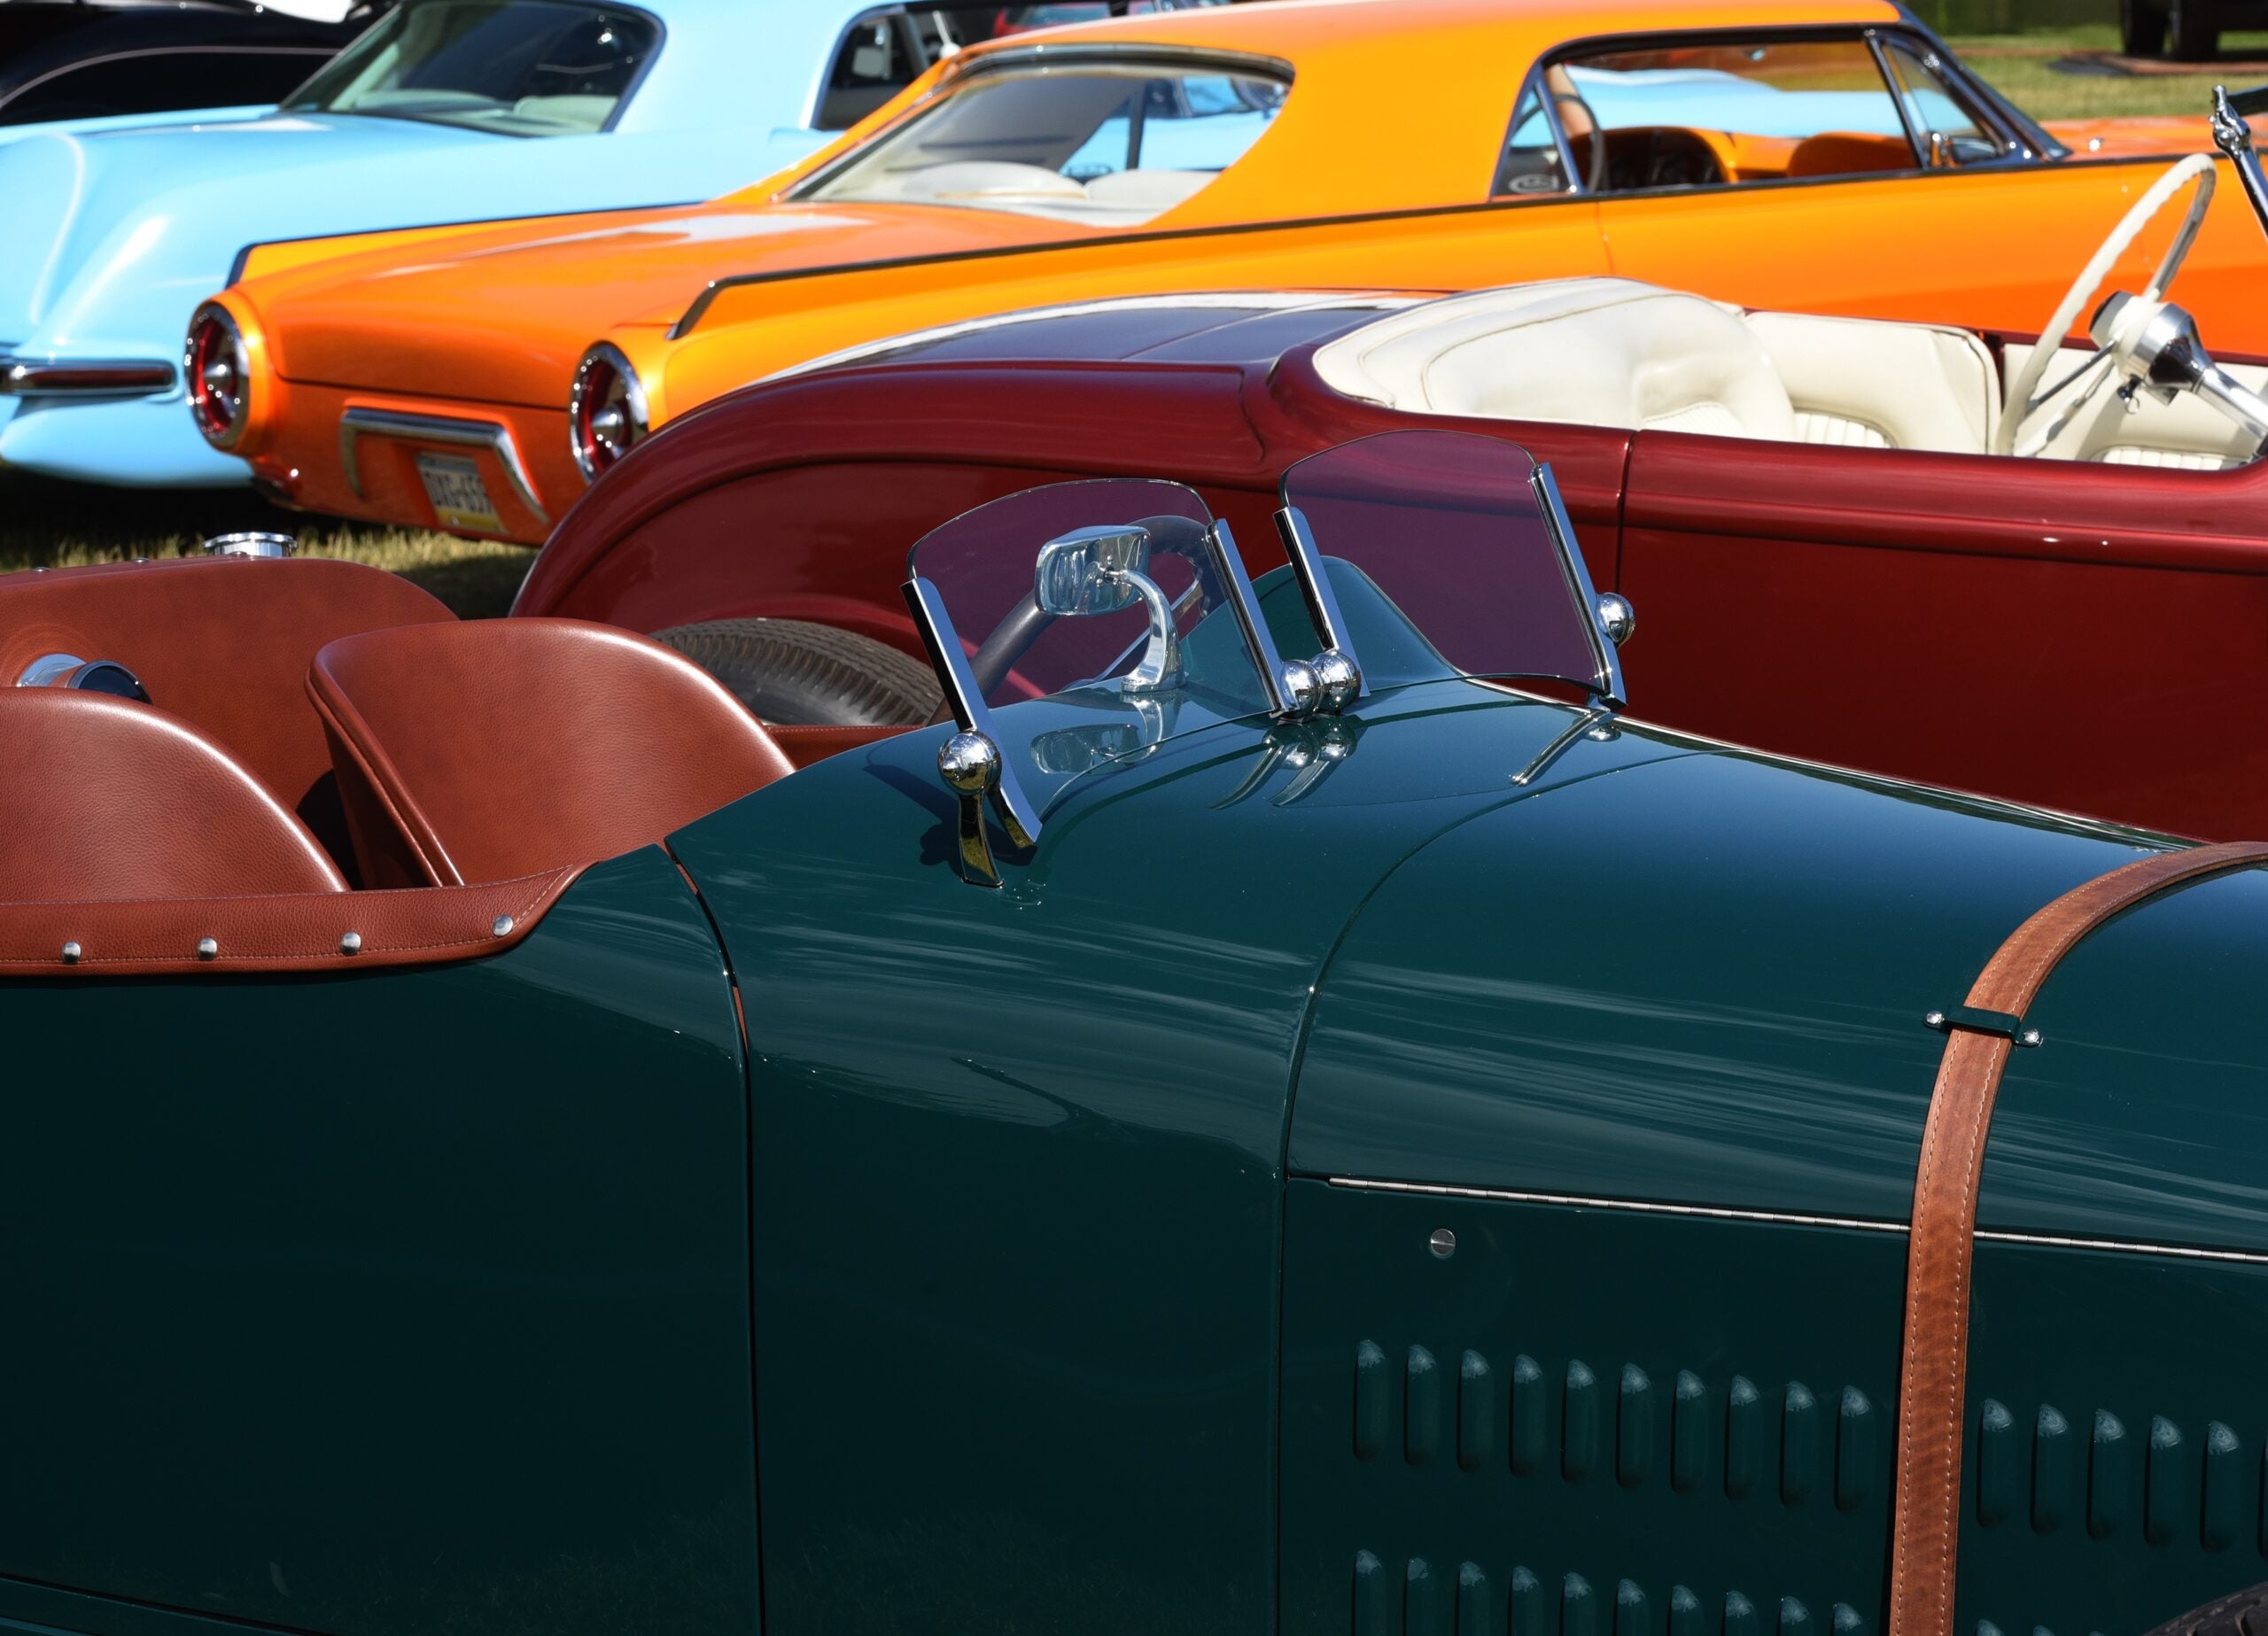 List of Antique car shows in maine 2018 with Best Modified